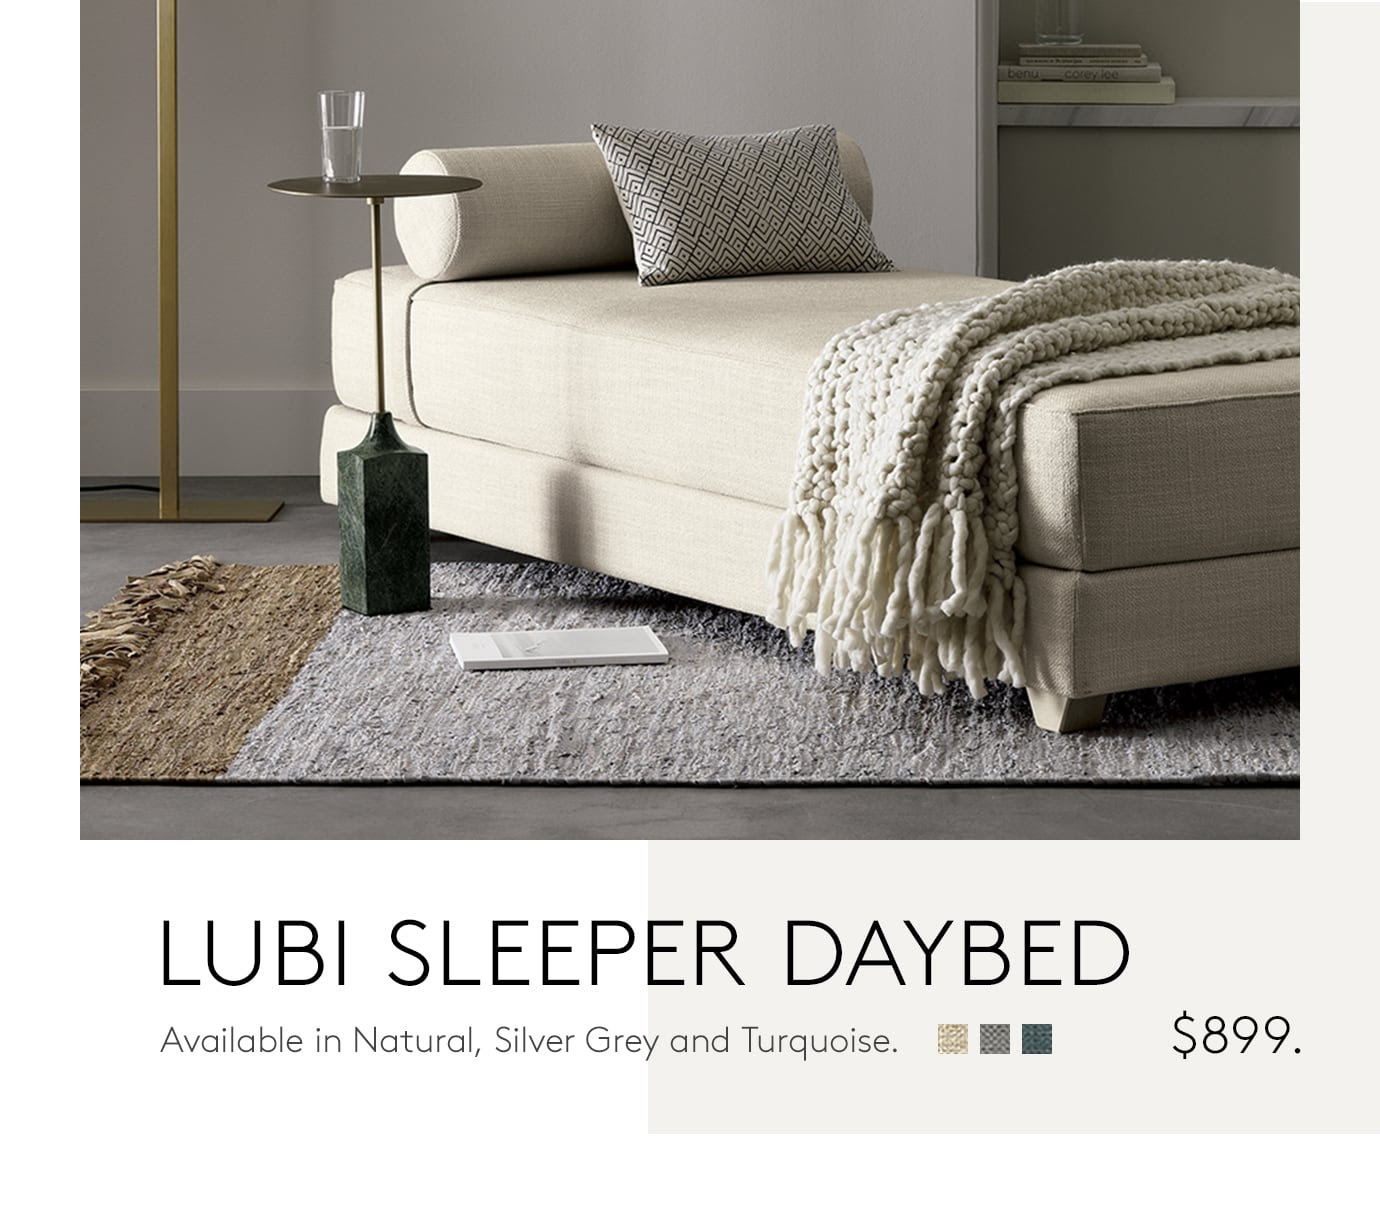 lubi sleeper daybed